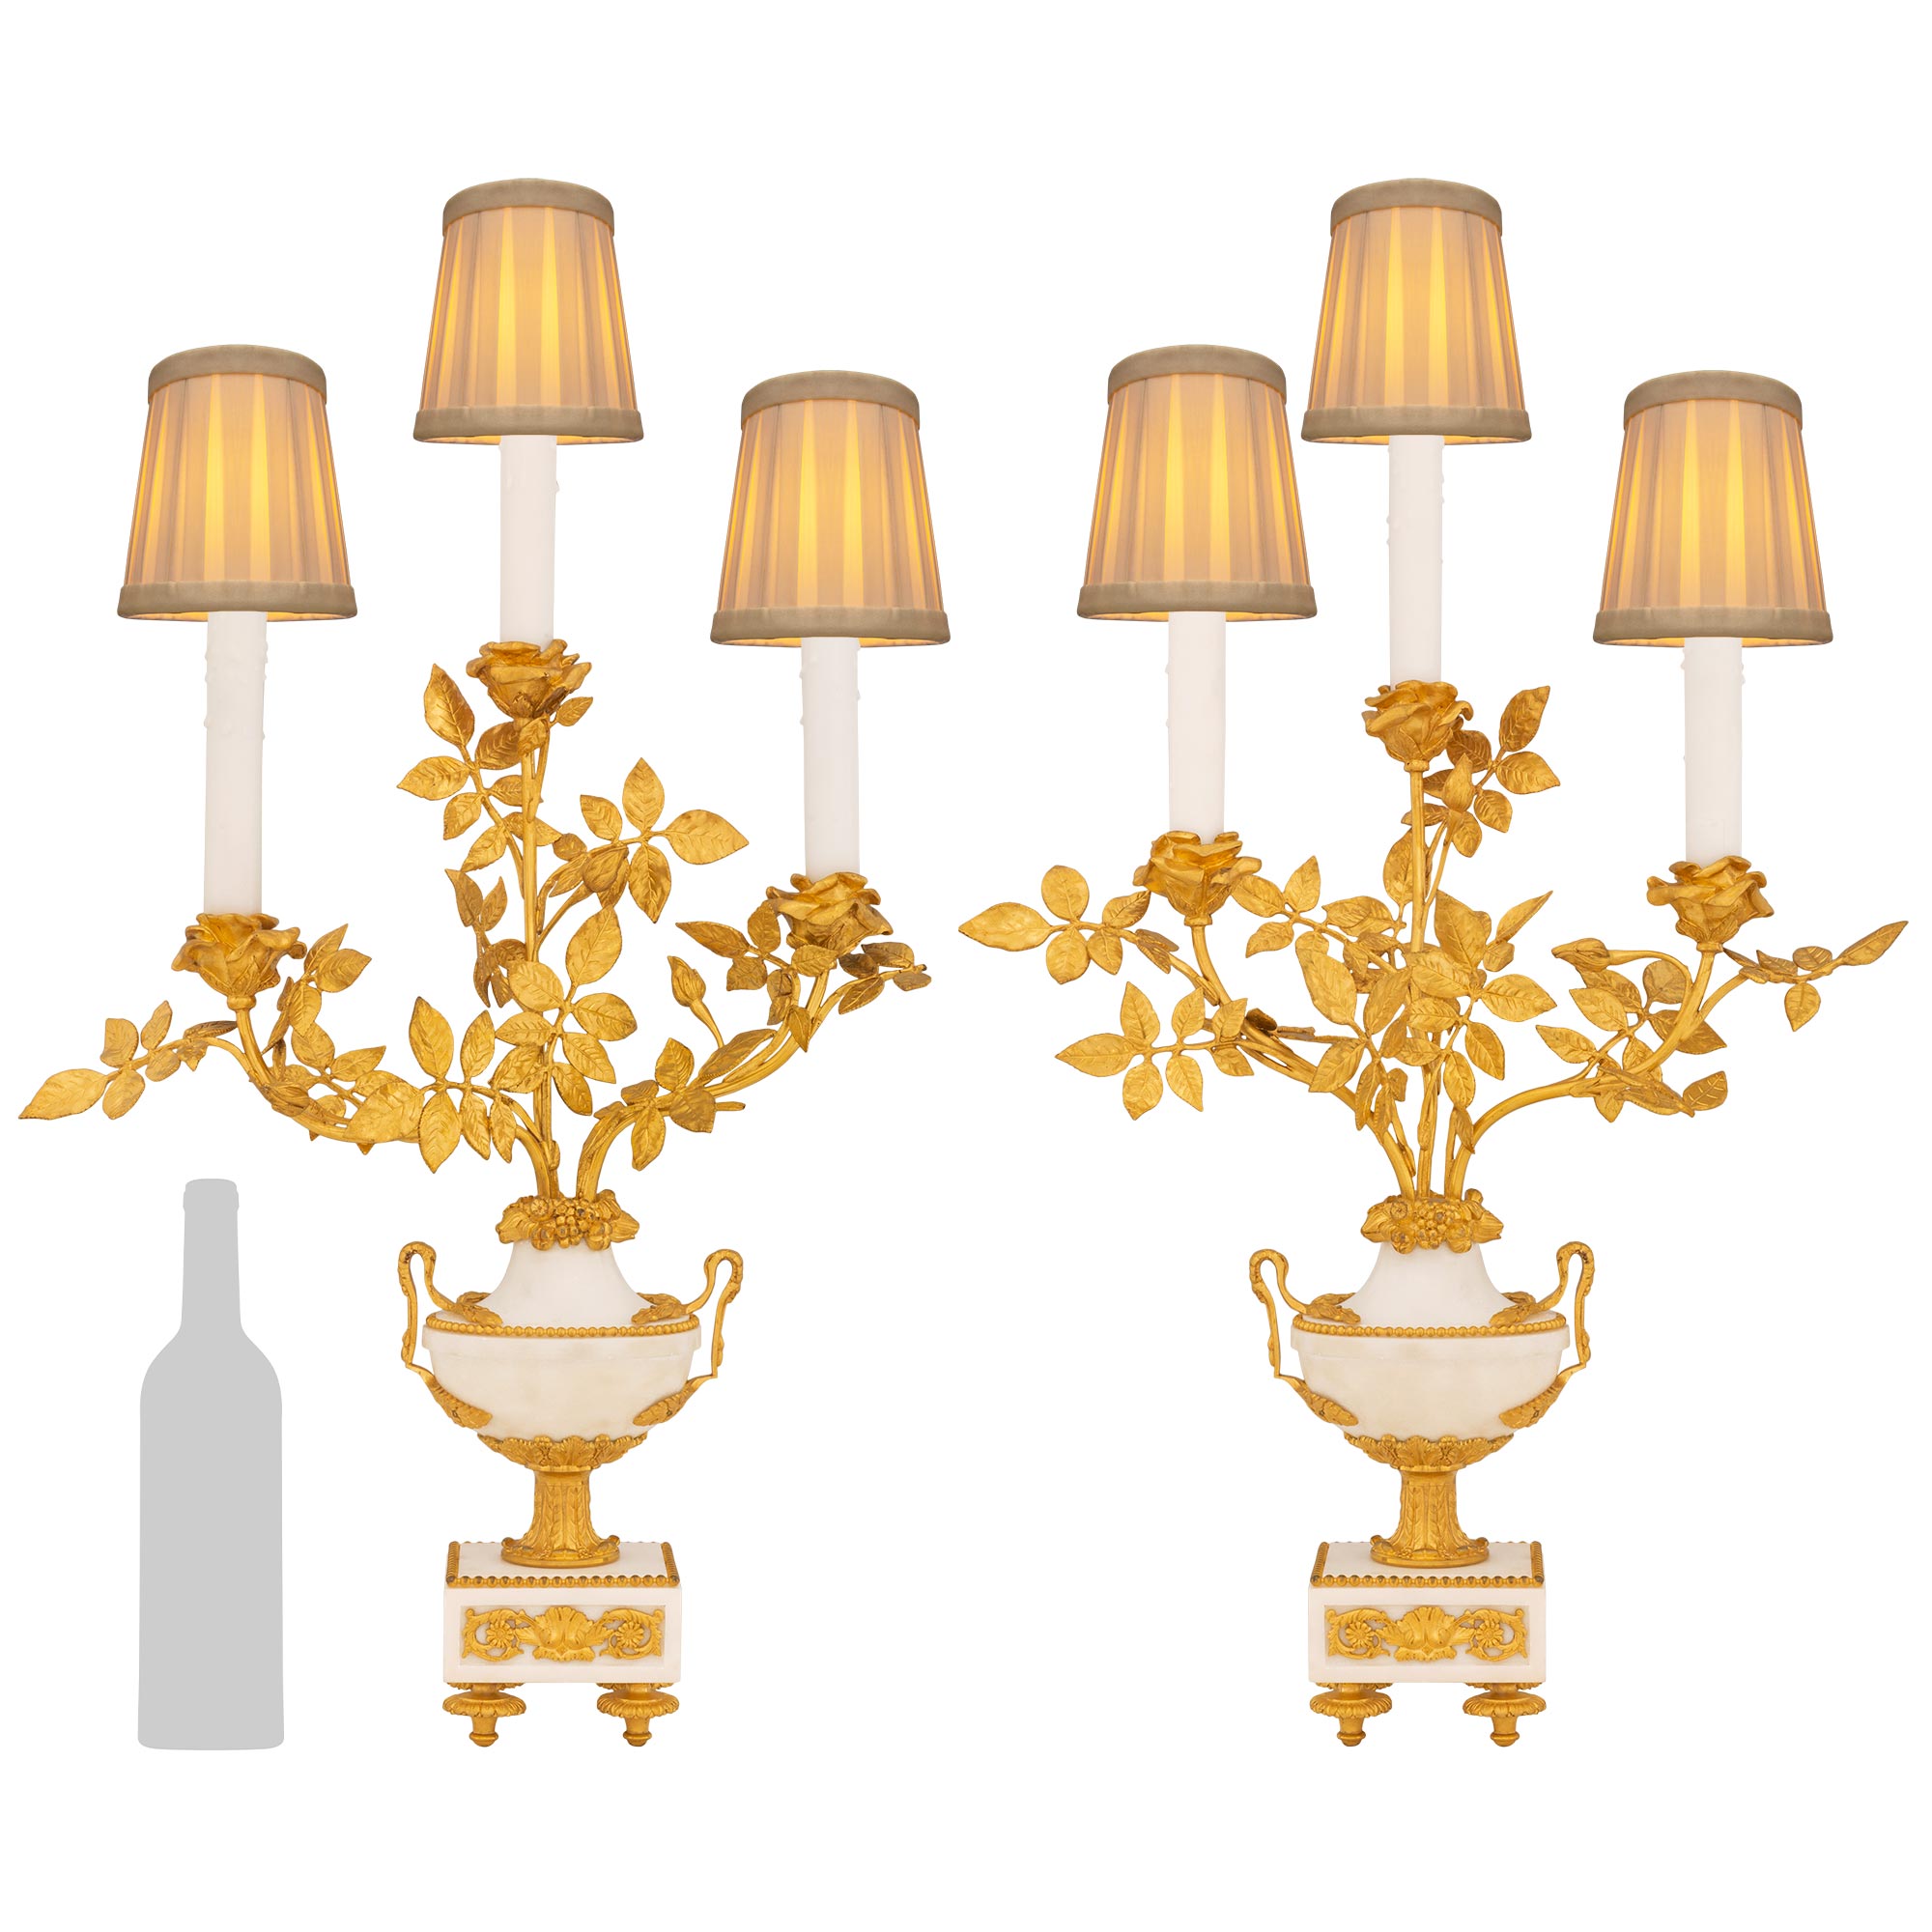 Pair of Mid 19th Century French Louis XVI St. Candelabras